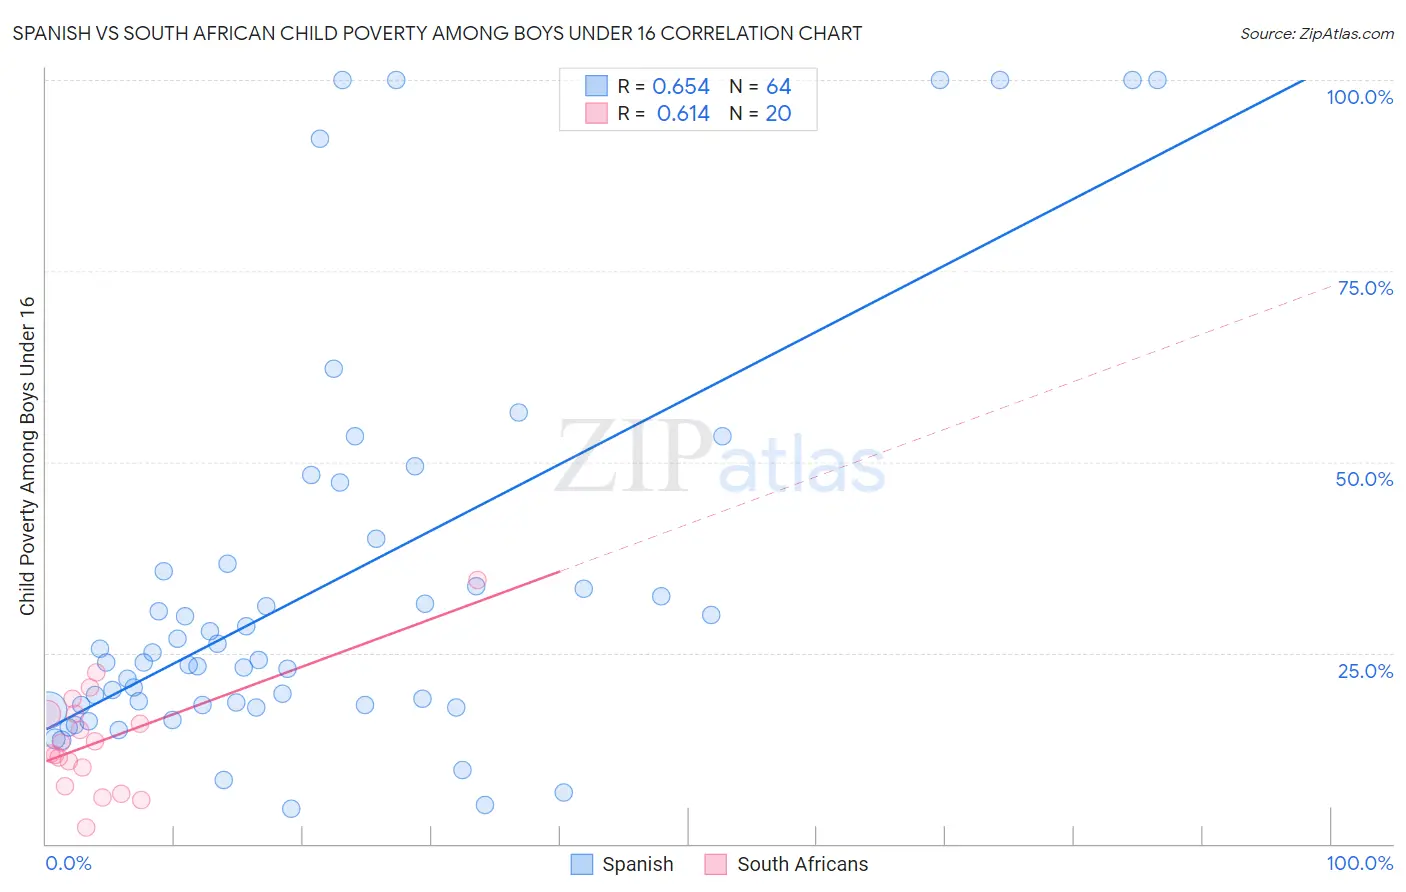 Spanish vs South African Child Poverty Among Boys Under 16